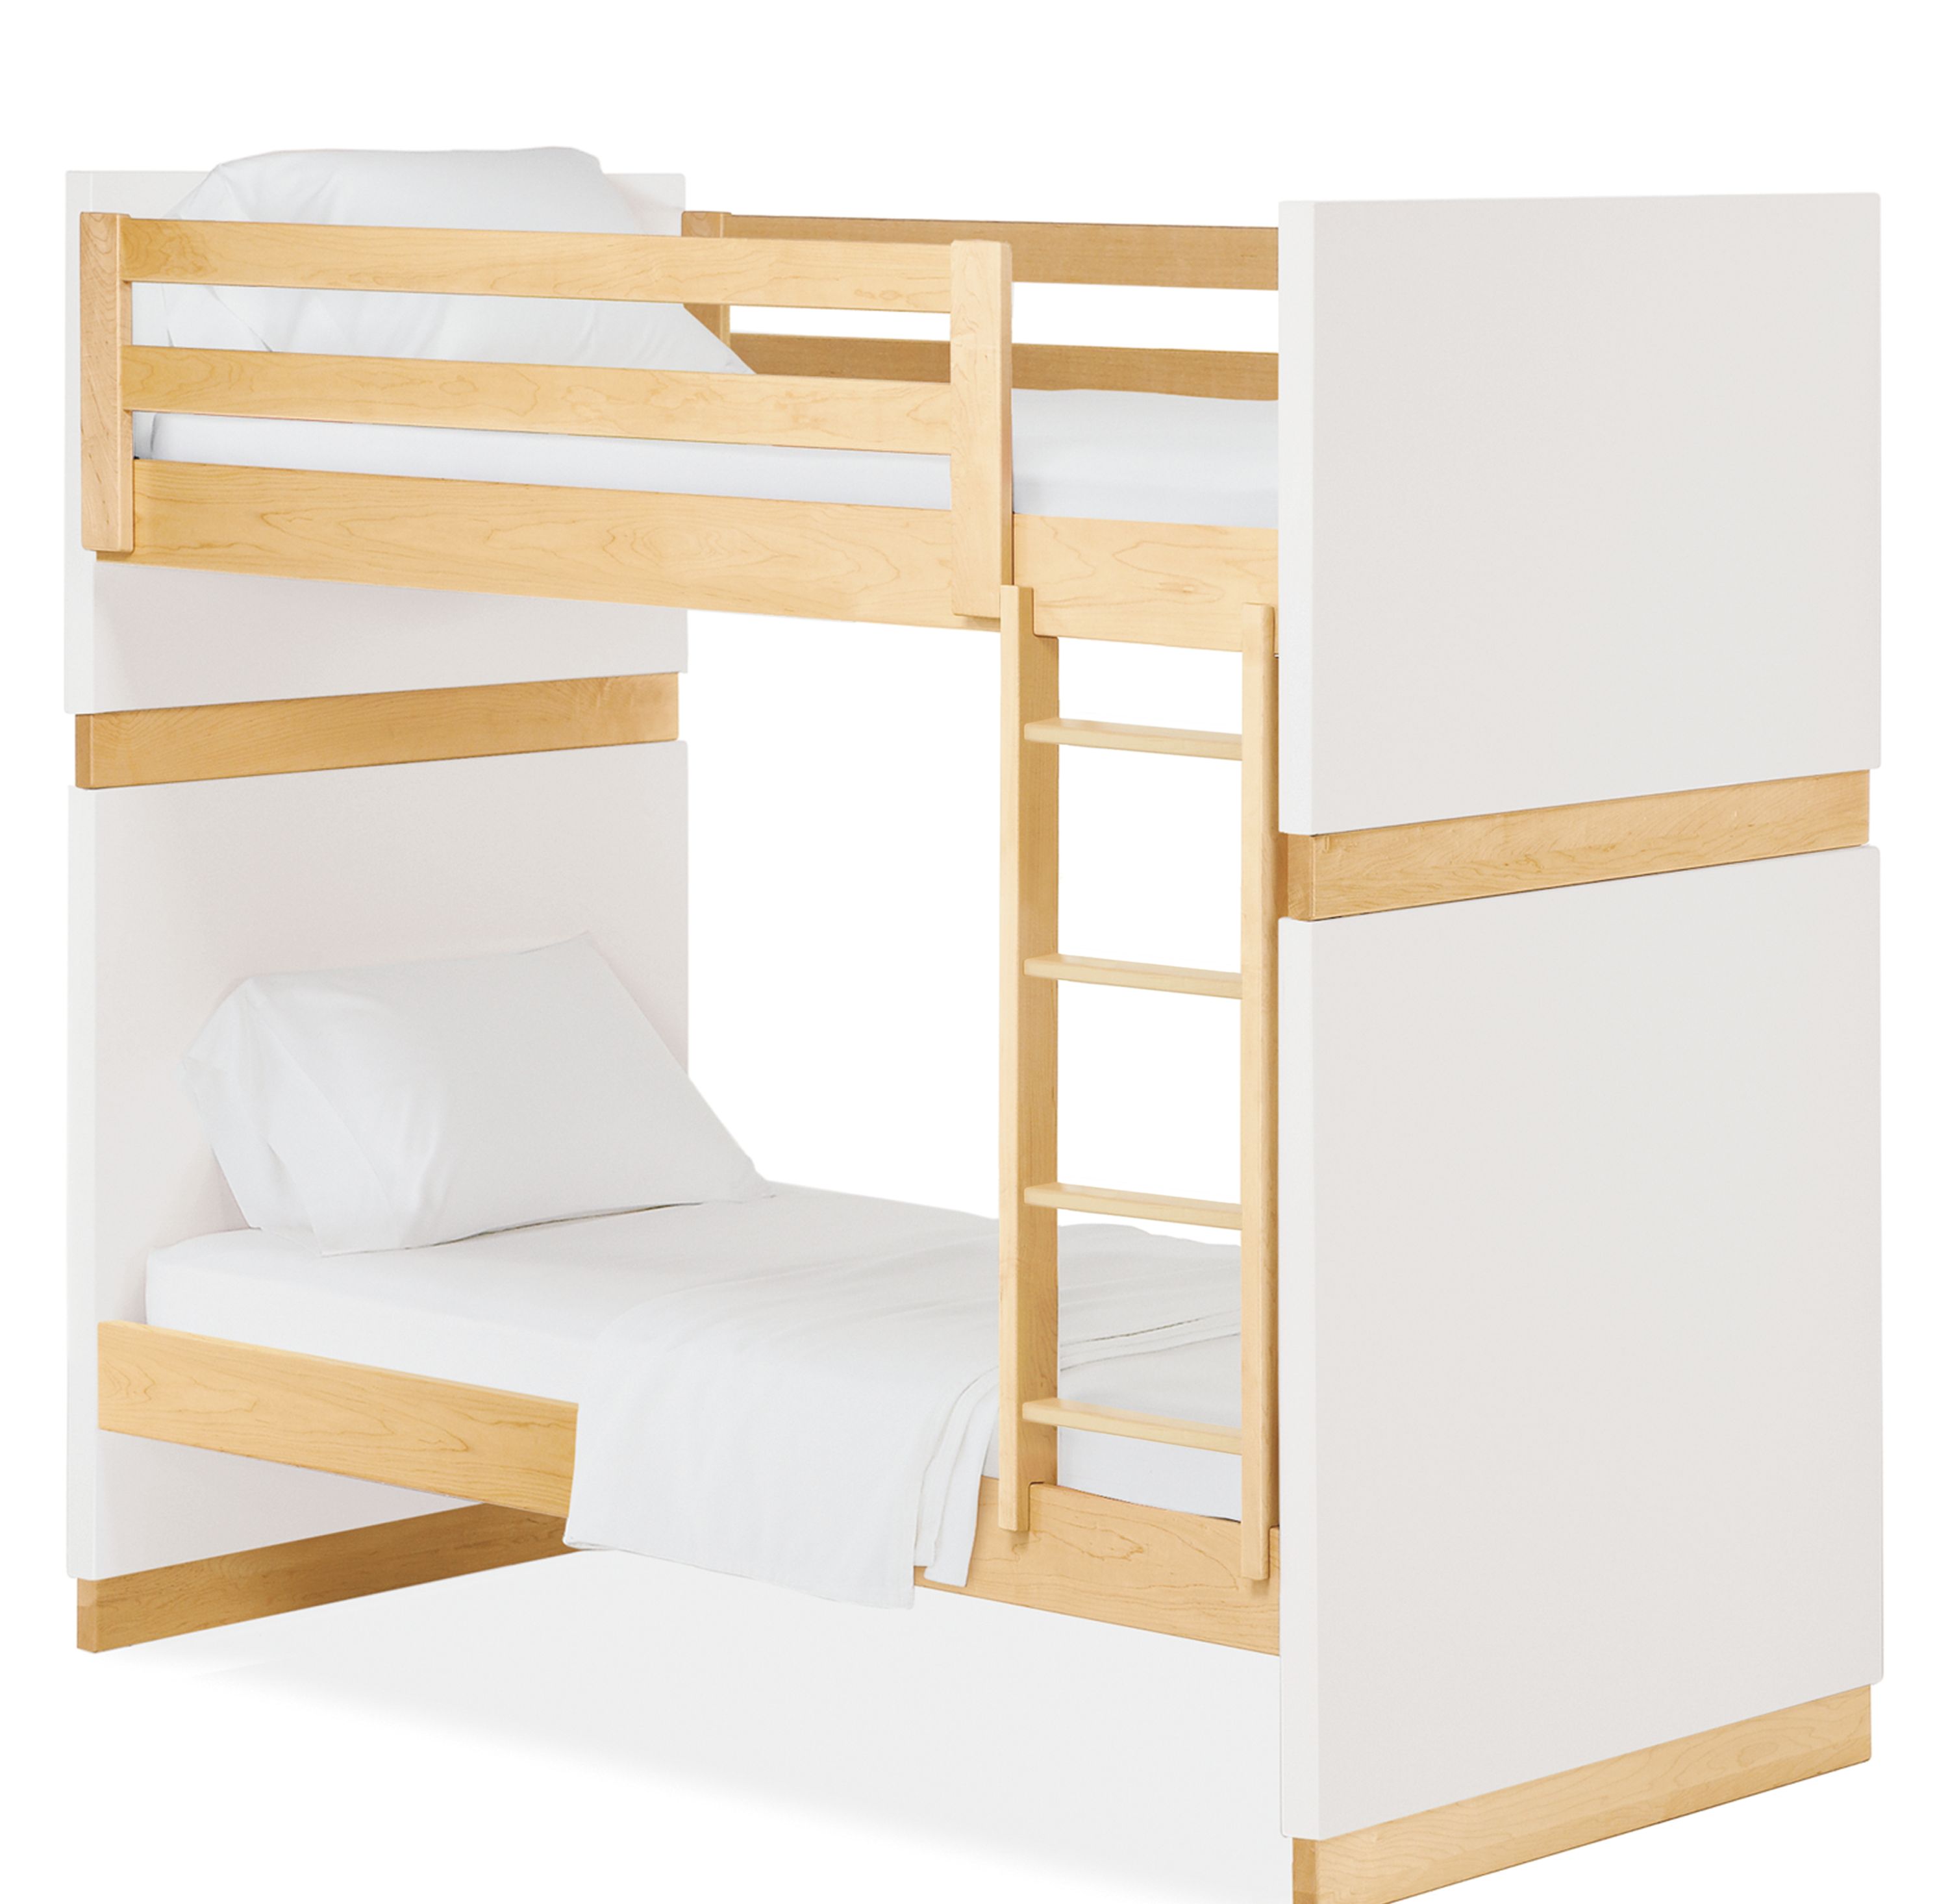 Moda Bunk Beds Twin Over, Wood Bunk Bed Ladder Only